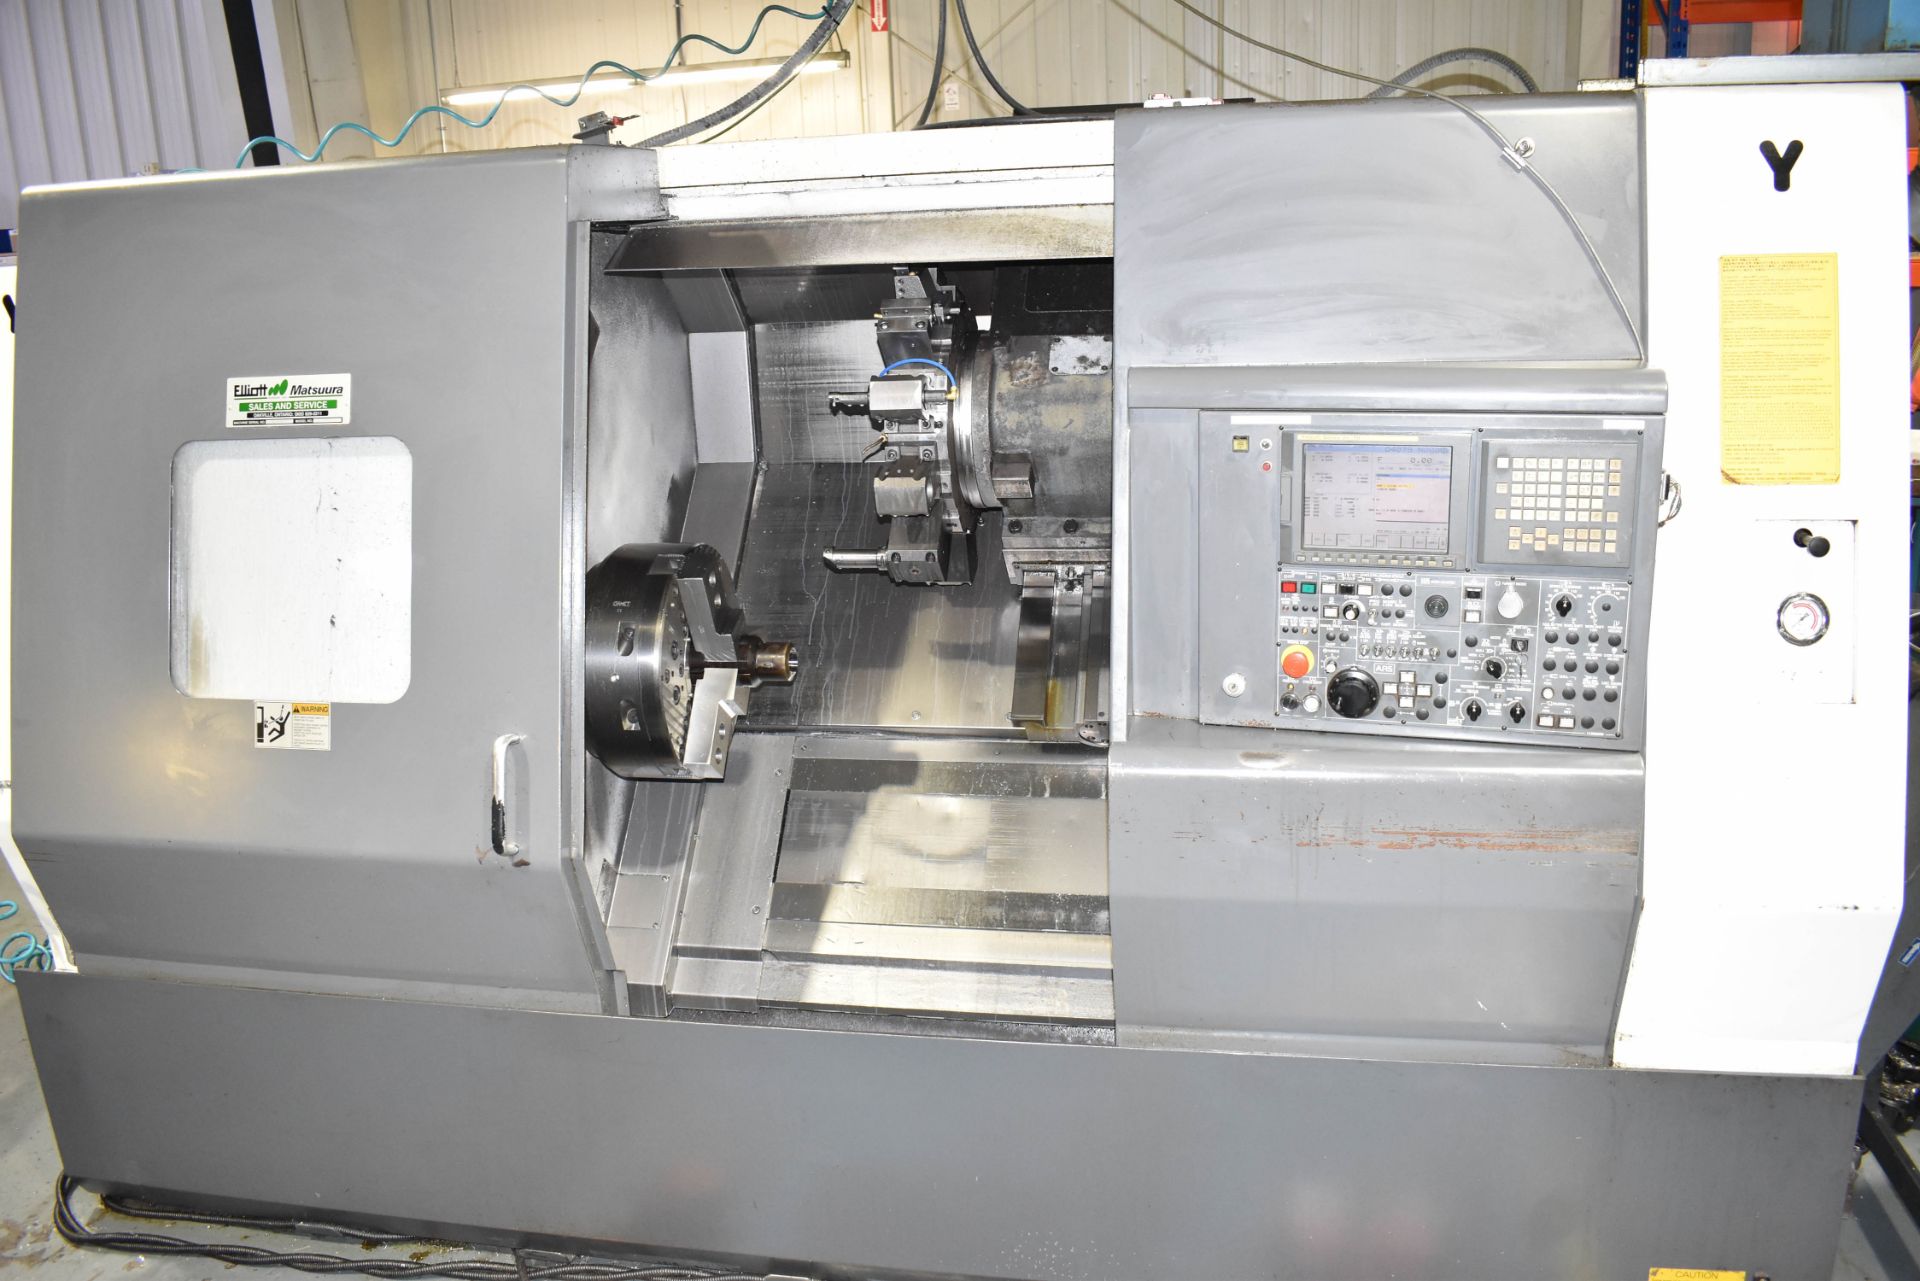 NAKAMURA-TOME (2009) SC-450 CNC TURNING CENTER WITH FANUC SERIES 21I-TB CNC CONTROL, 31.88" SWING